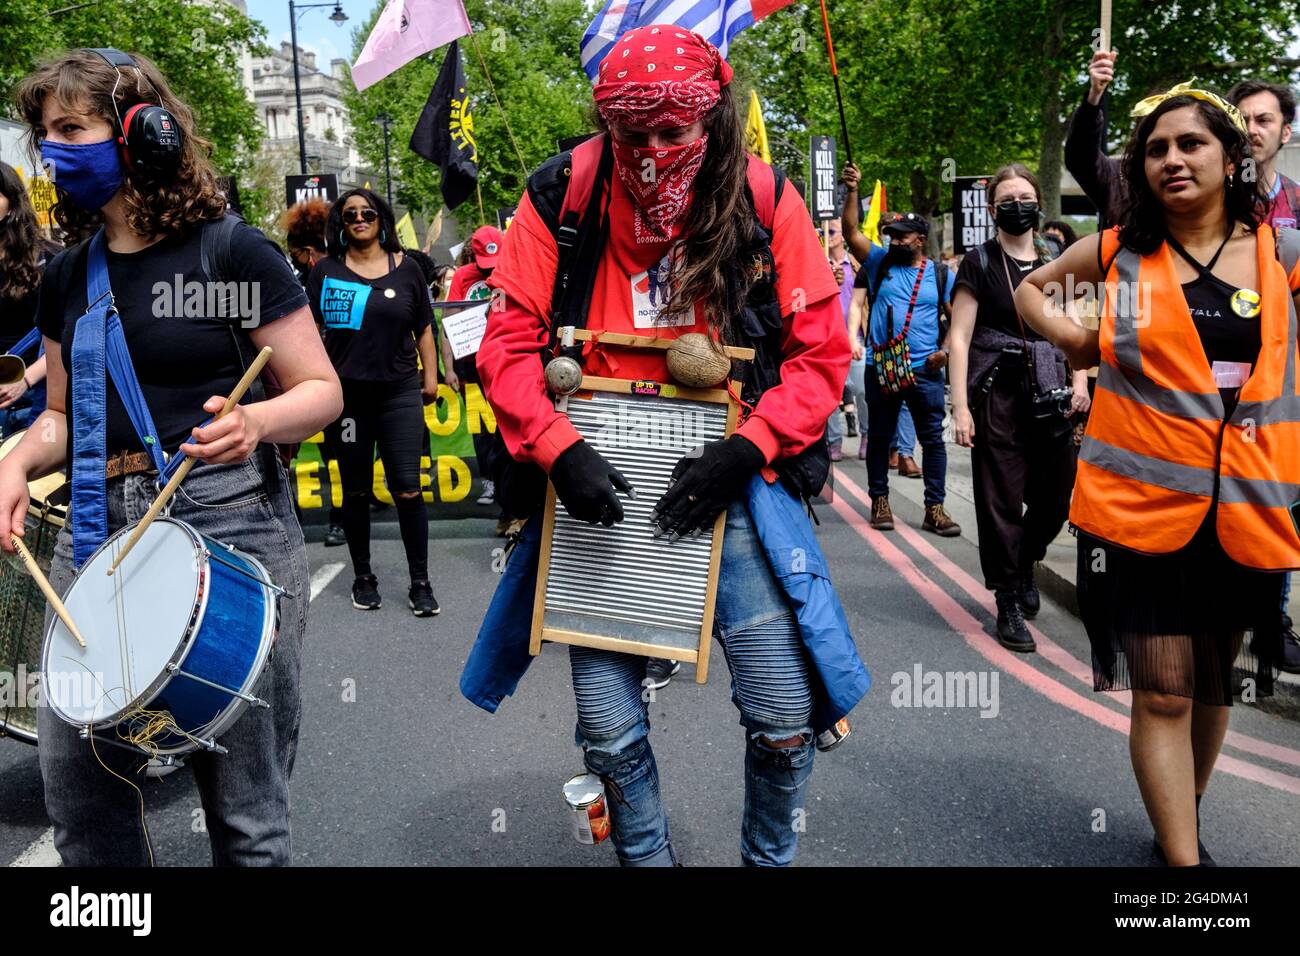 Musical washboard being played by band at Black lives Matter and Kill the Bill demonstration. led by the UK branch of Black Lives Matter, specifically fighting against the use of police power as a means of silencing black voices, in response to recent killings of black people by the police. Stock Photo